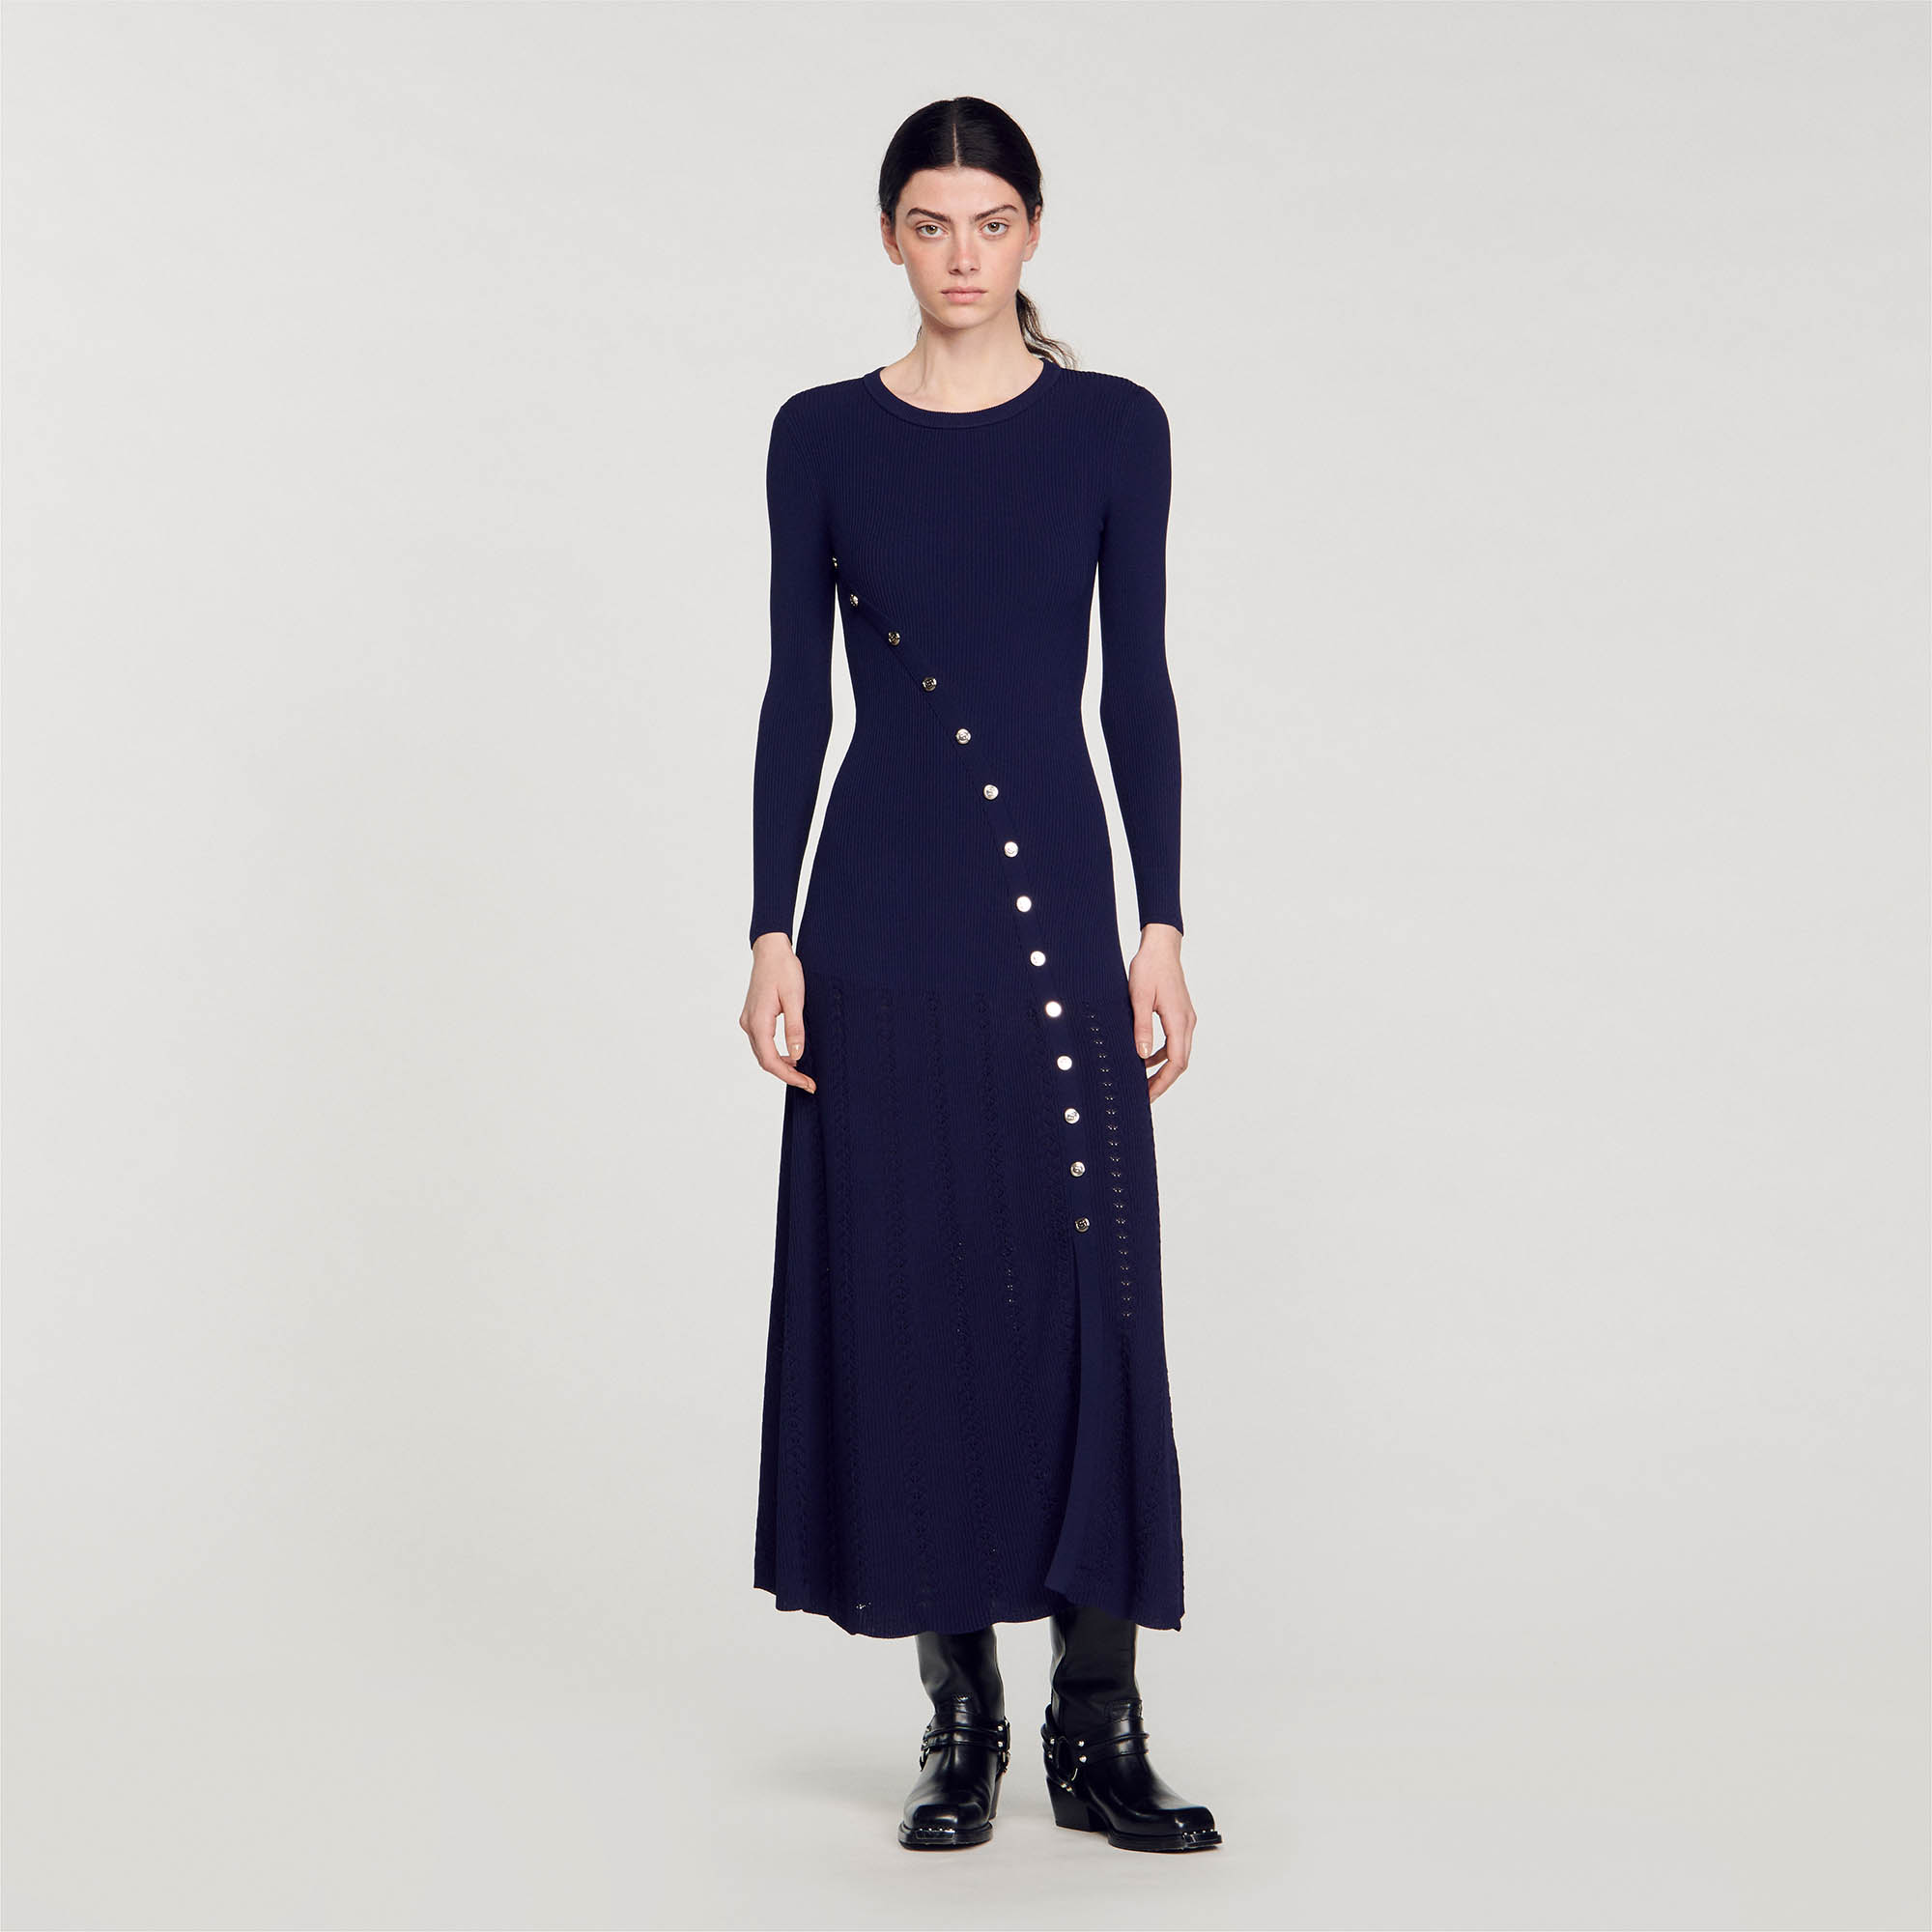 Sandro viscose Rib knit round neck midi dress with long sleeves, featuring an asymmetric button fastening revealing a slit and flared fancy knit bottom